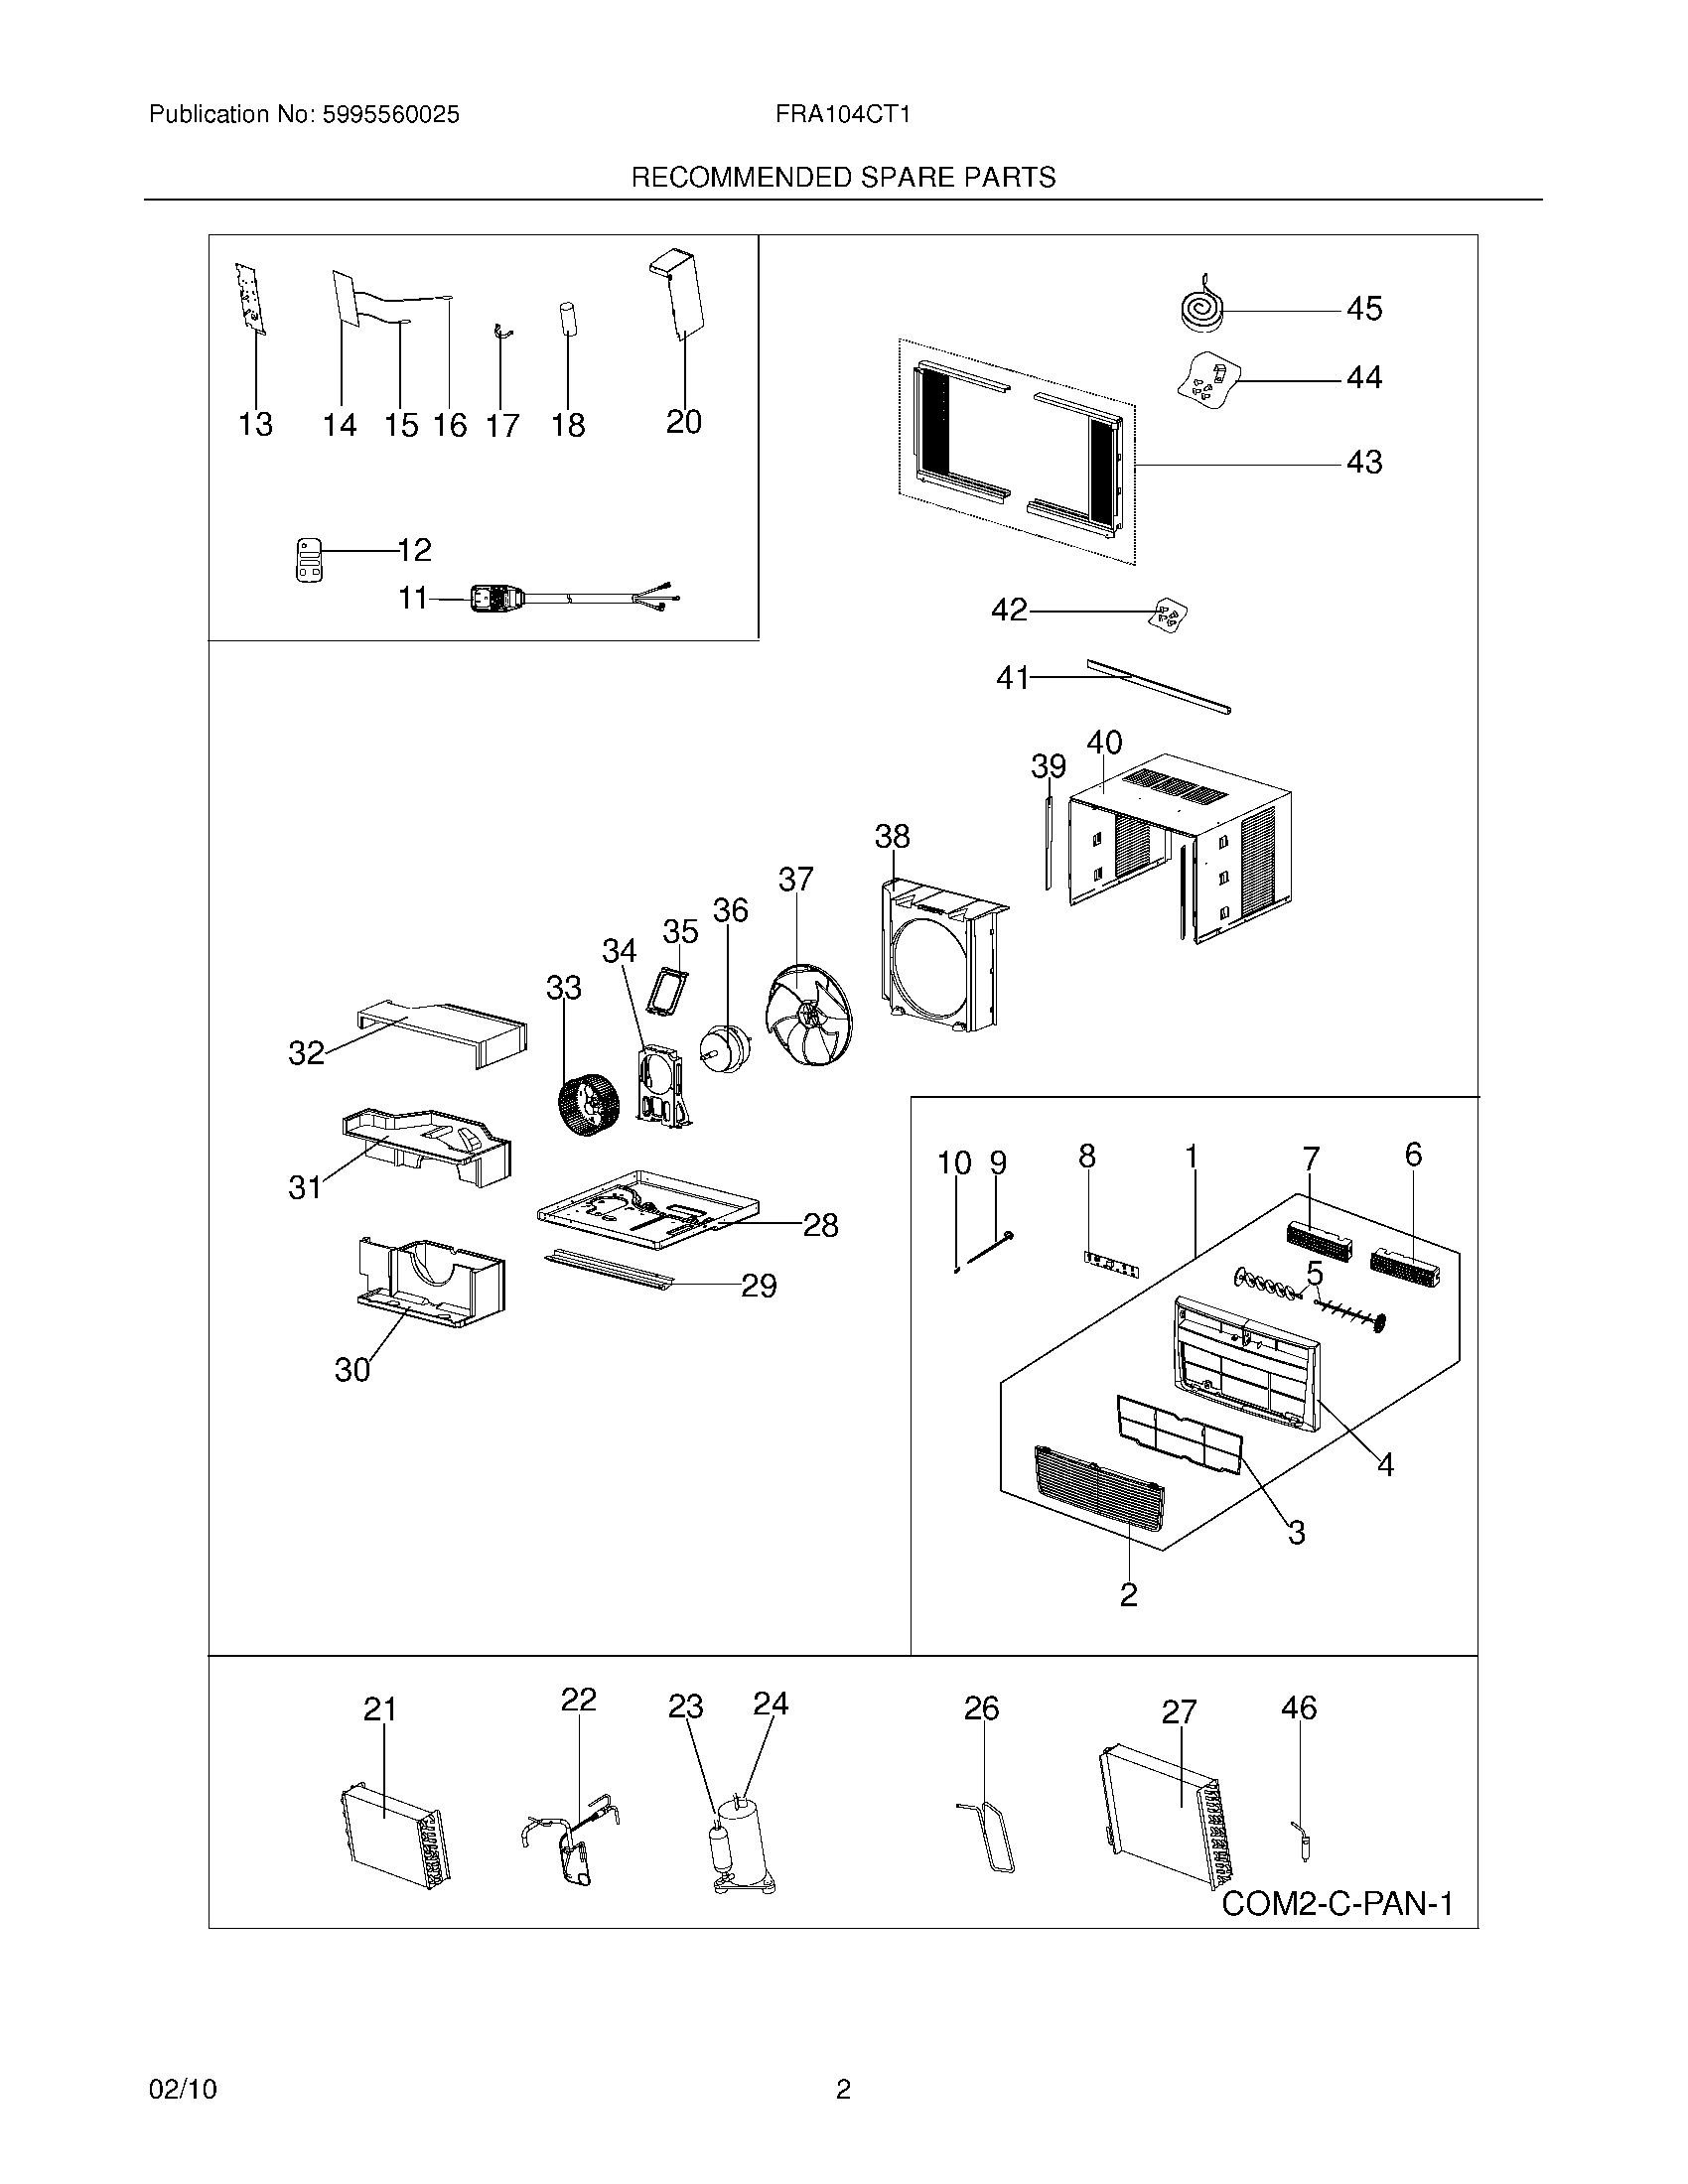 03 - RECOMMENDED SPARE PARTS